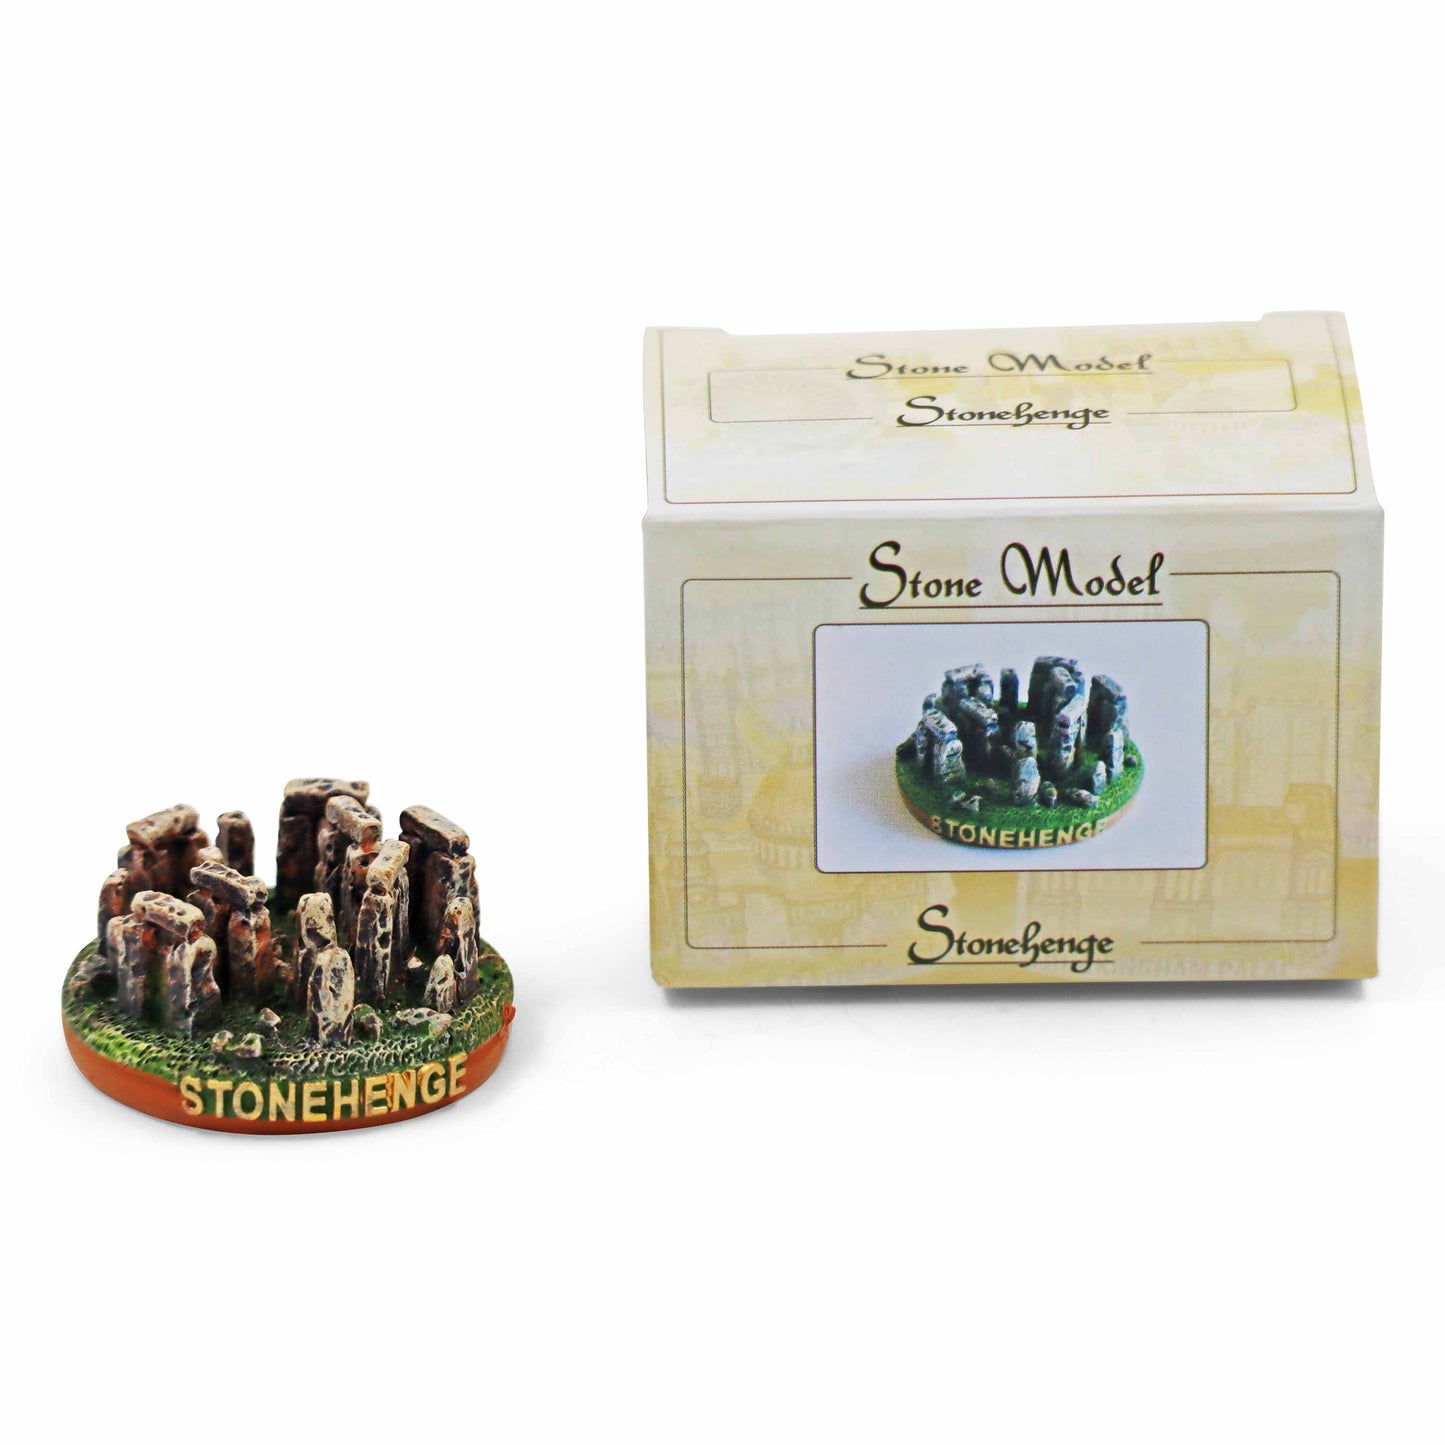 London Souvenirs & Gifts - Stonehenge Gifts